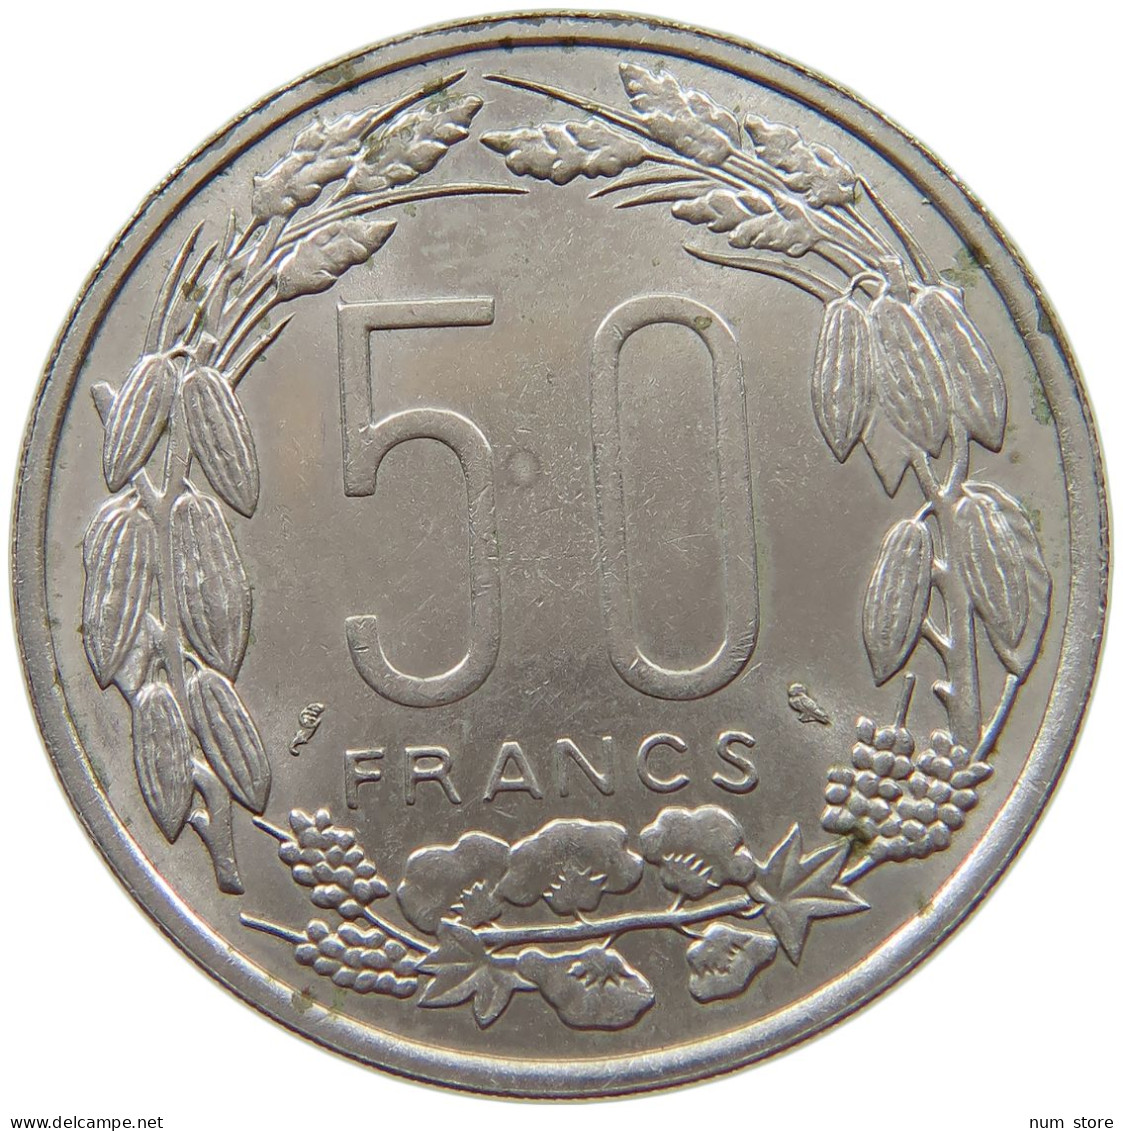 CENTRAL AFRICA 50 FRANCS 1961  #s070 0109 - Central African Republic